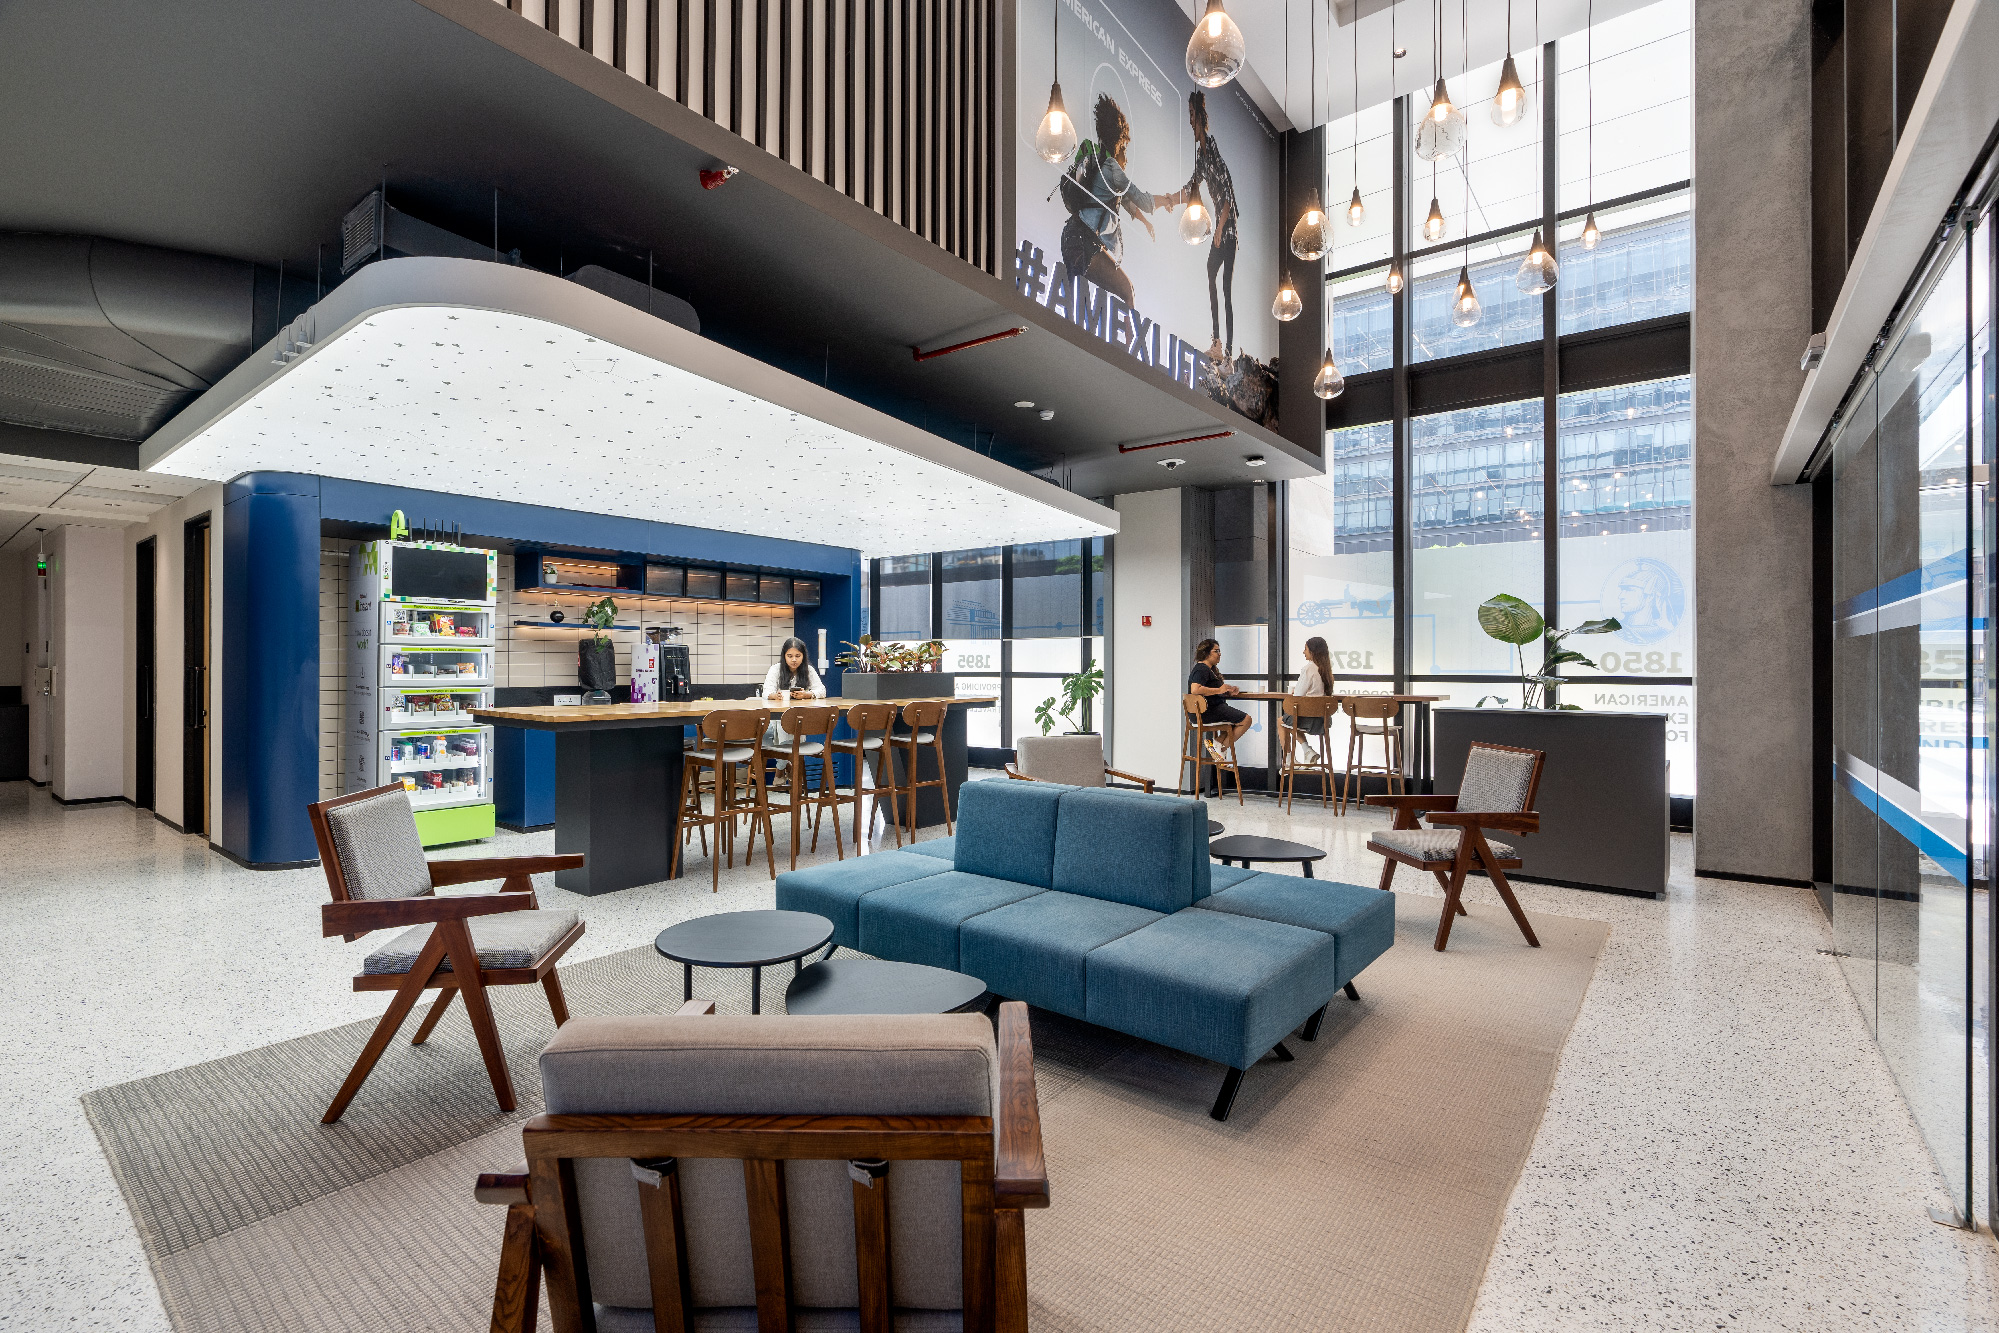 Wellness focussed workspace design: Work-life balance with gym, daycare, and modern cafeteria